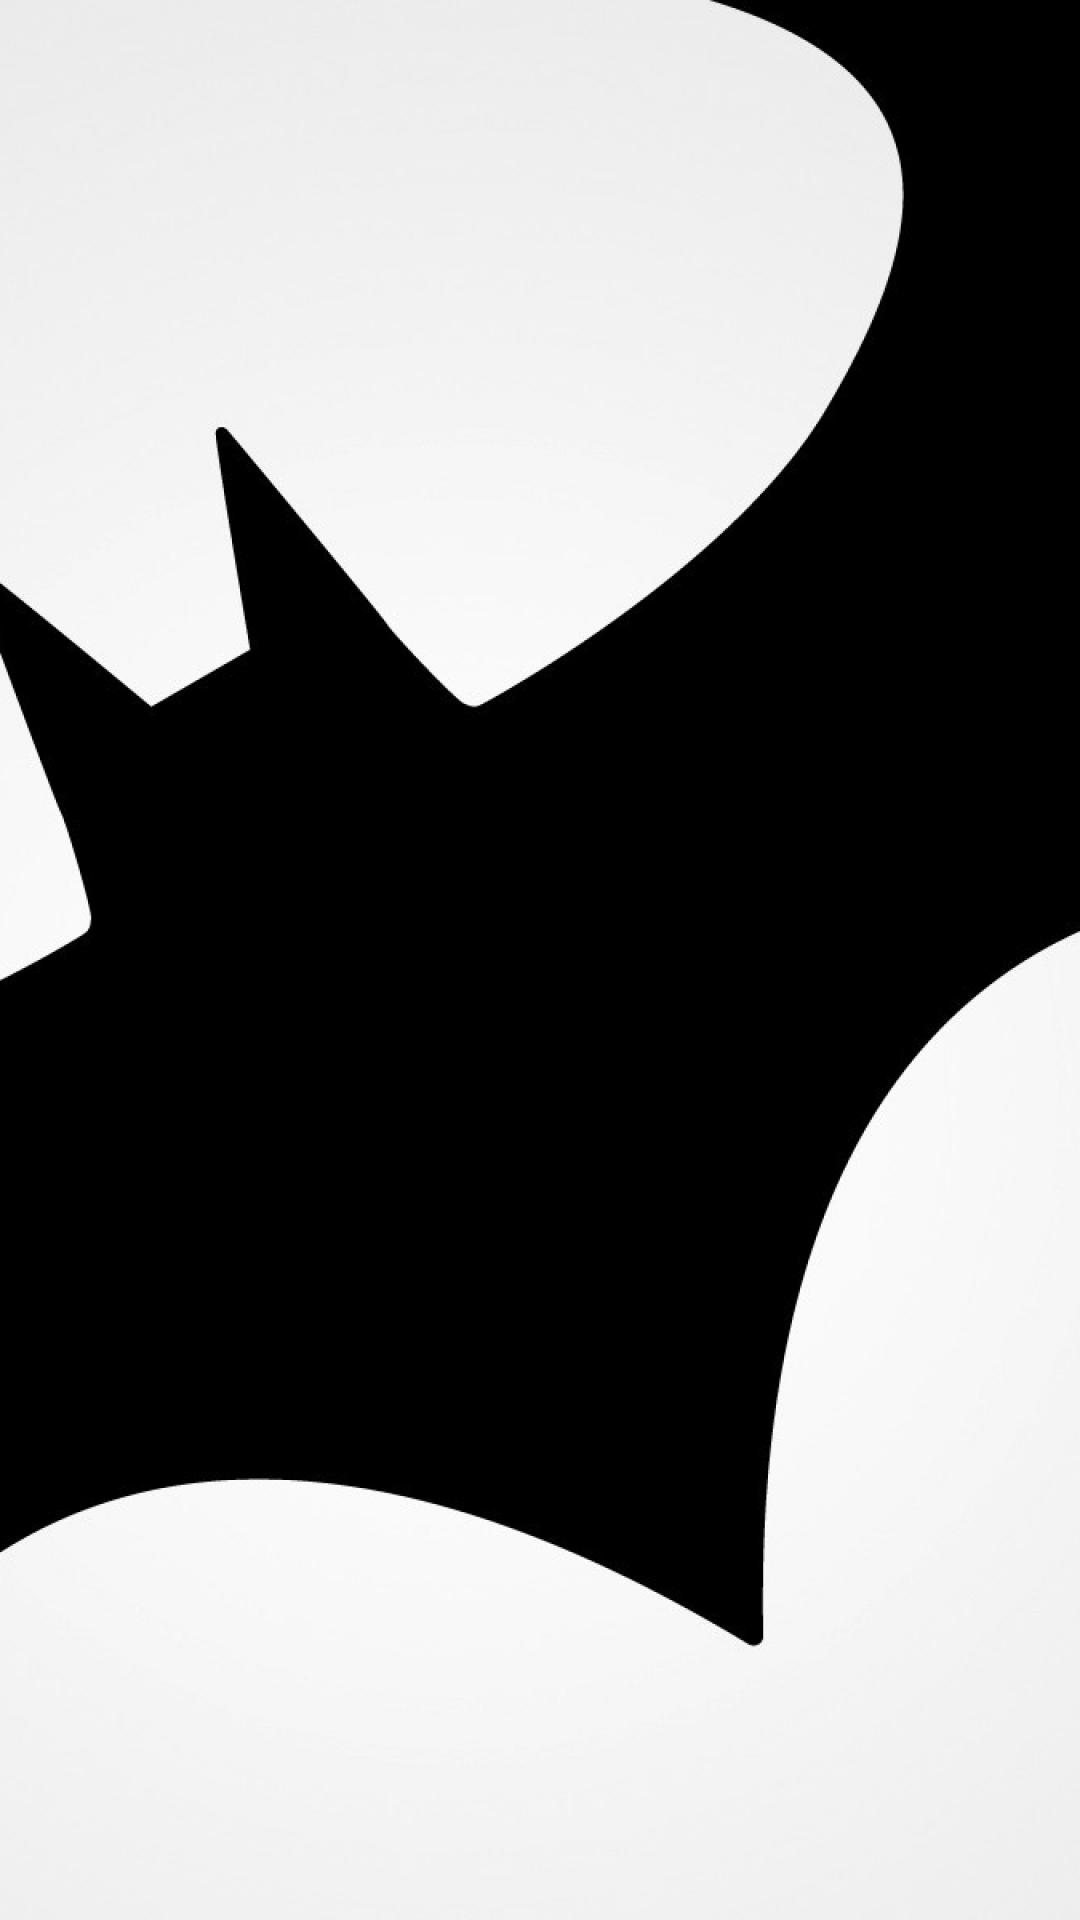 Batman Logo iPhone Wallpapers | HD Wallpapers, Backgrounds, Images ...